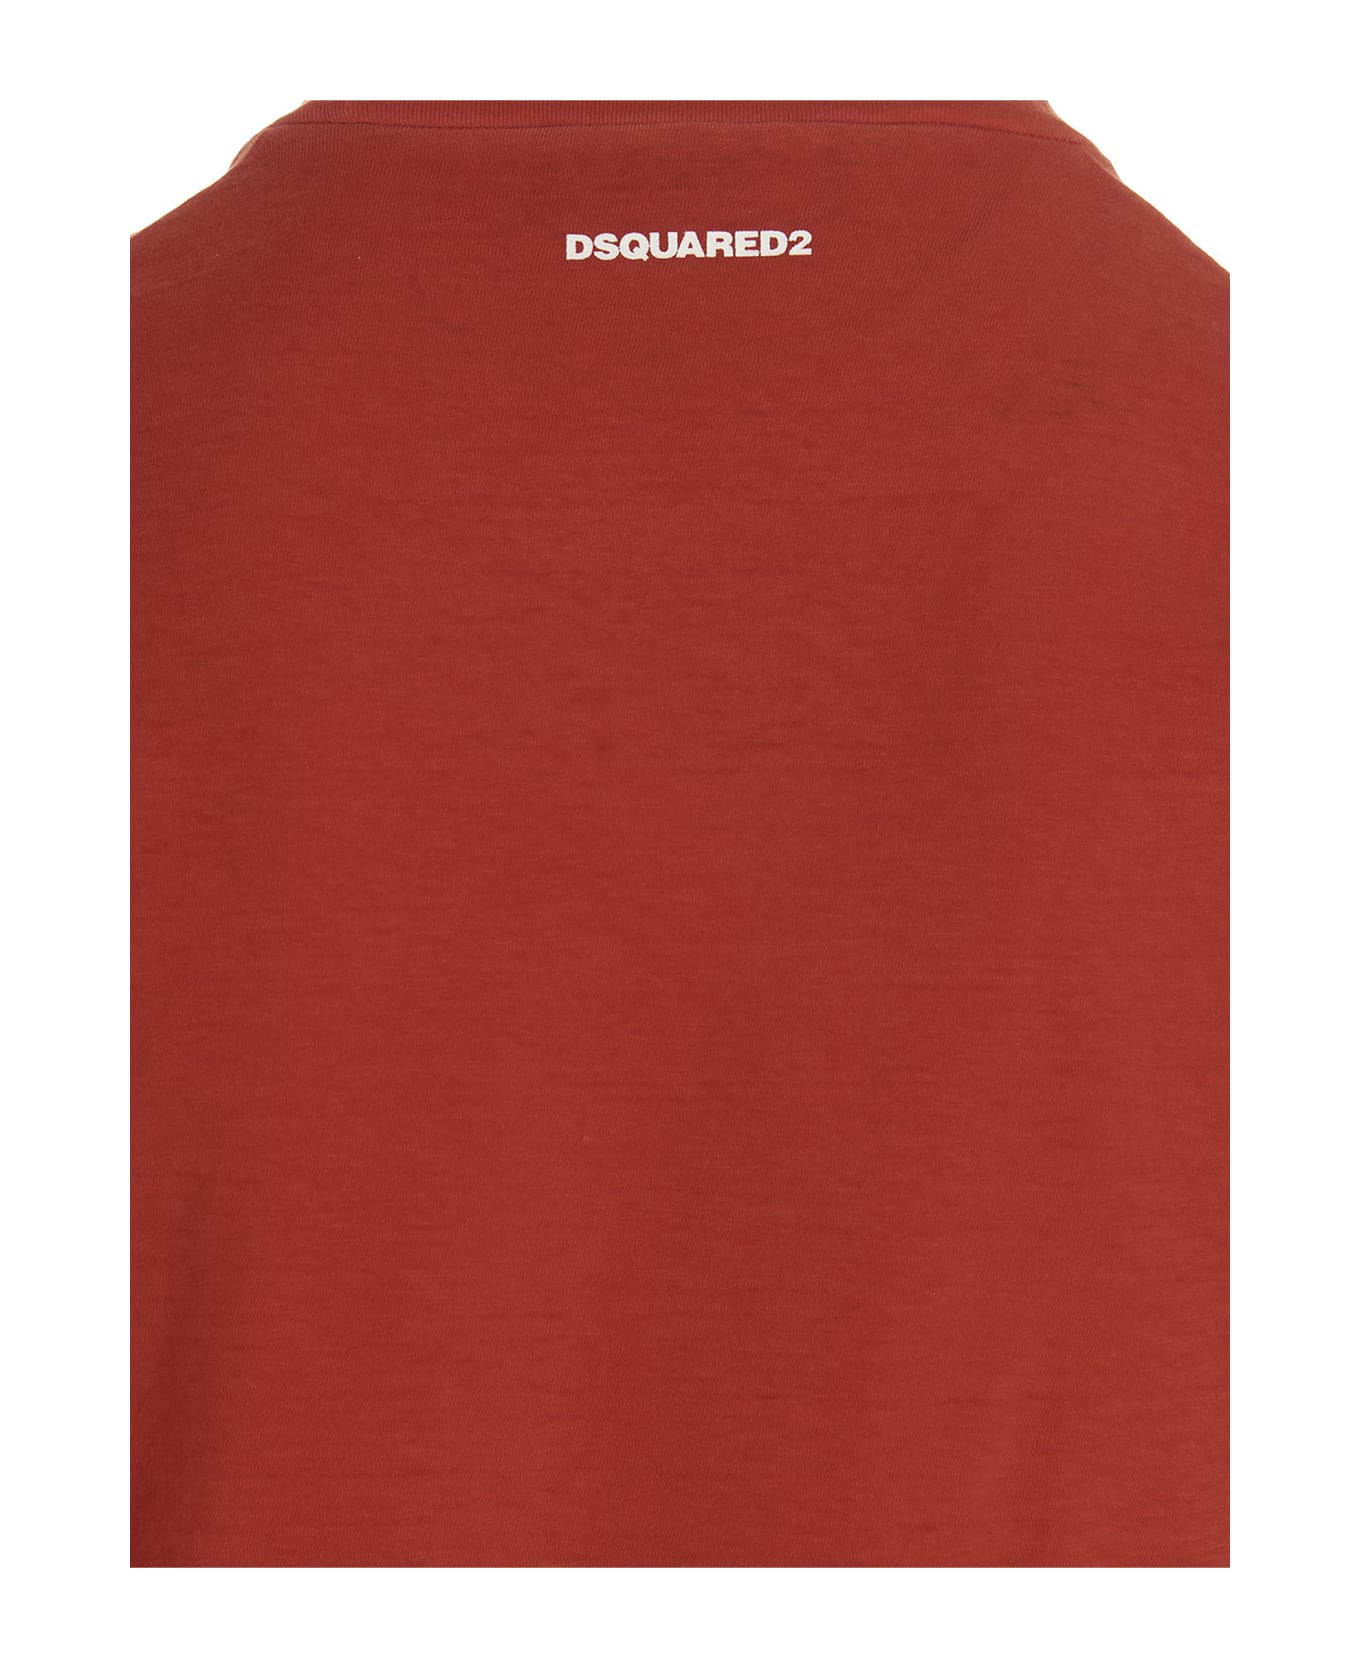 Dsquared2 Honda Crew Neck T-shirt With Logo Print On The Chest In Cotton Man - Red